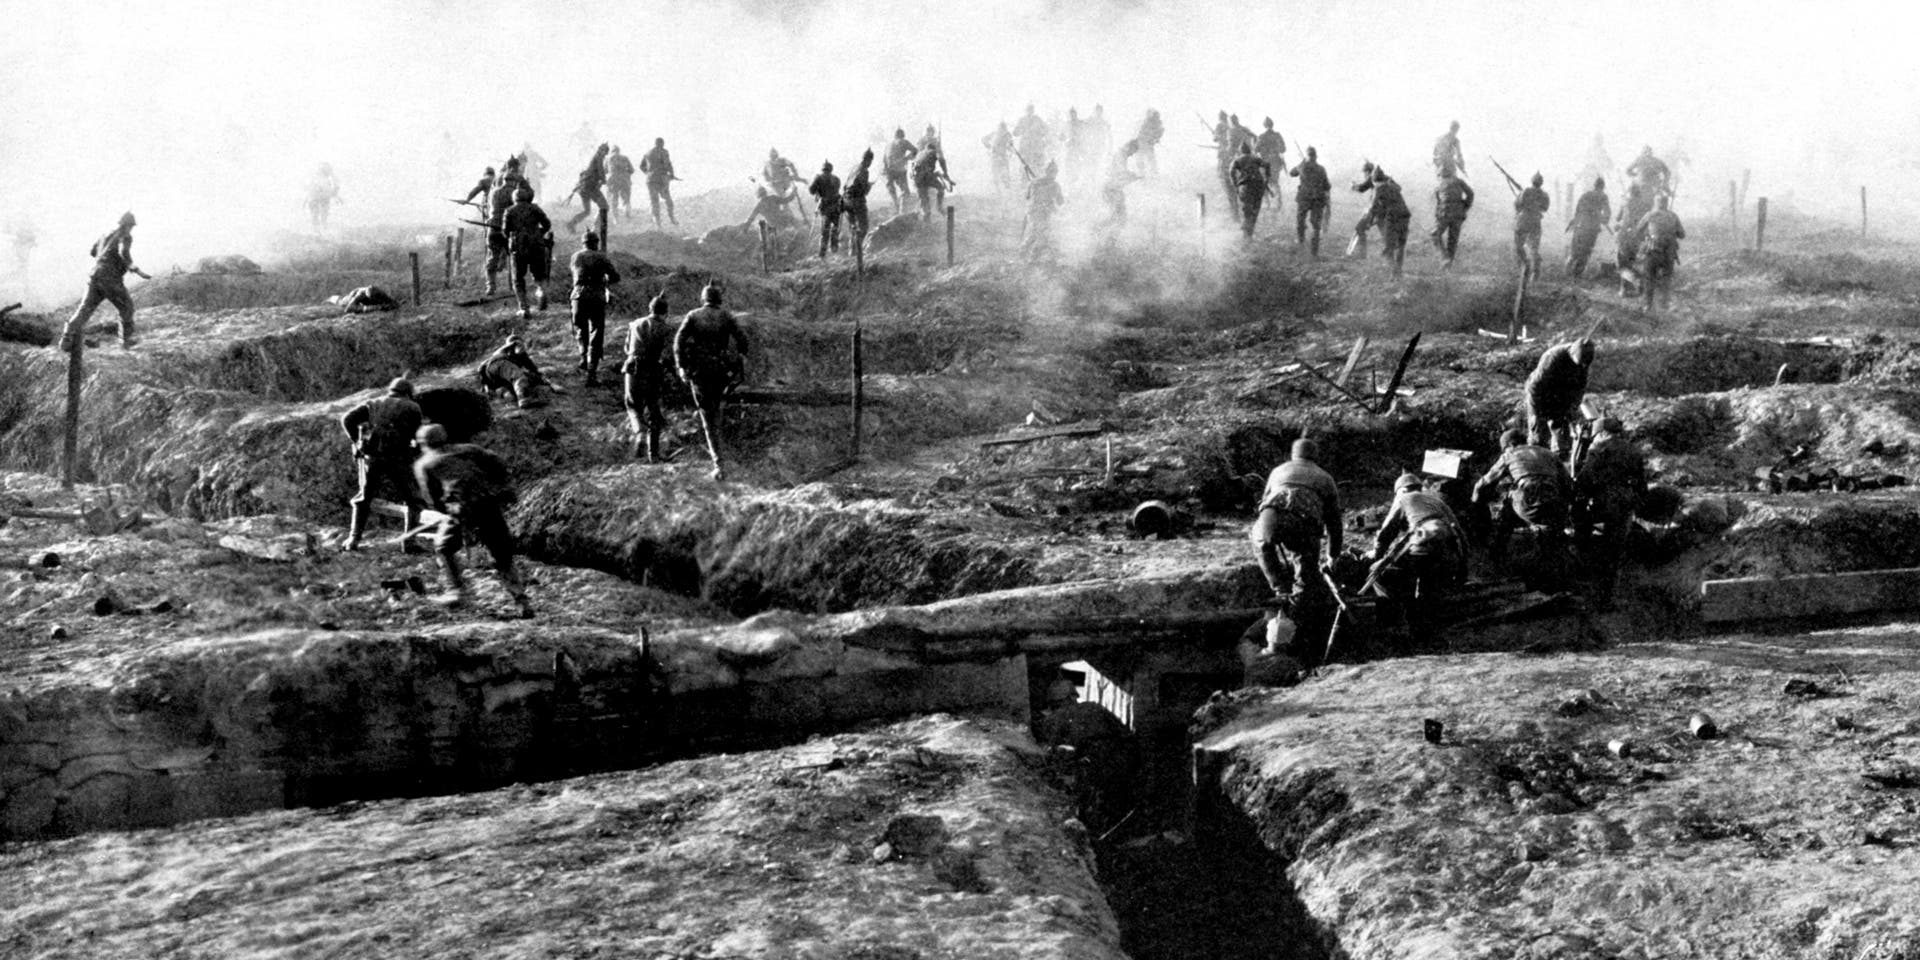 "I Have a Rendevous with Death."FRANCE - CIRCA 1916: German troops advancing from their trenches. (Photo by Buyenlarge/Getty Images)